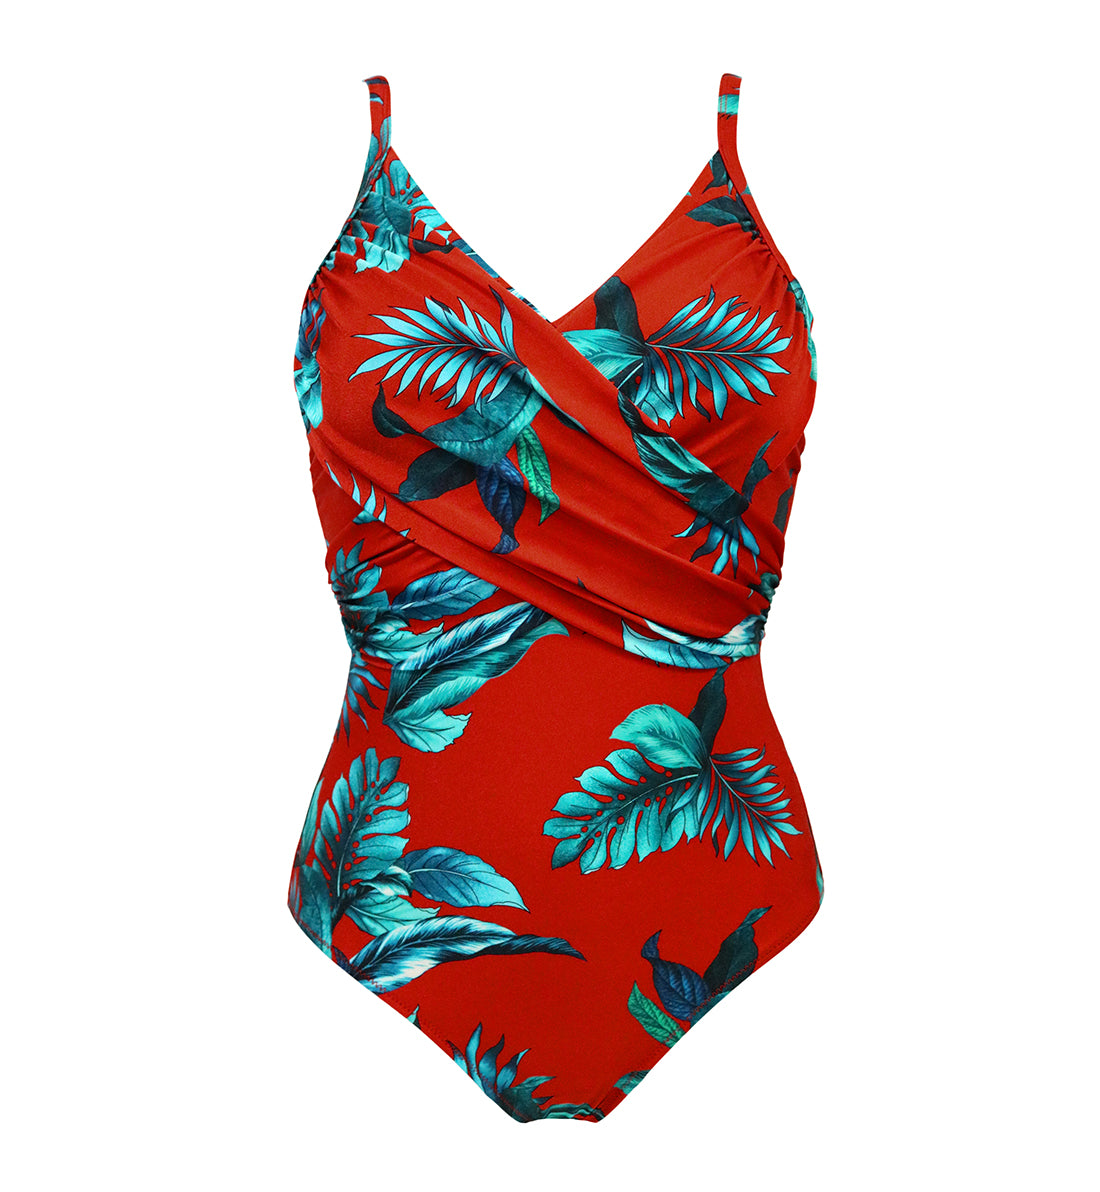 Pour Moi Paradiso Control Swimsuit (17506),Small,Red - Red,Small